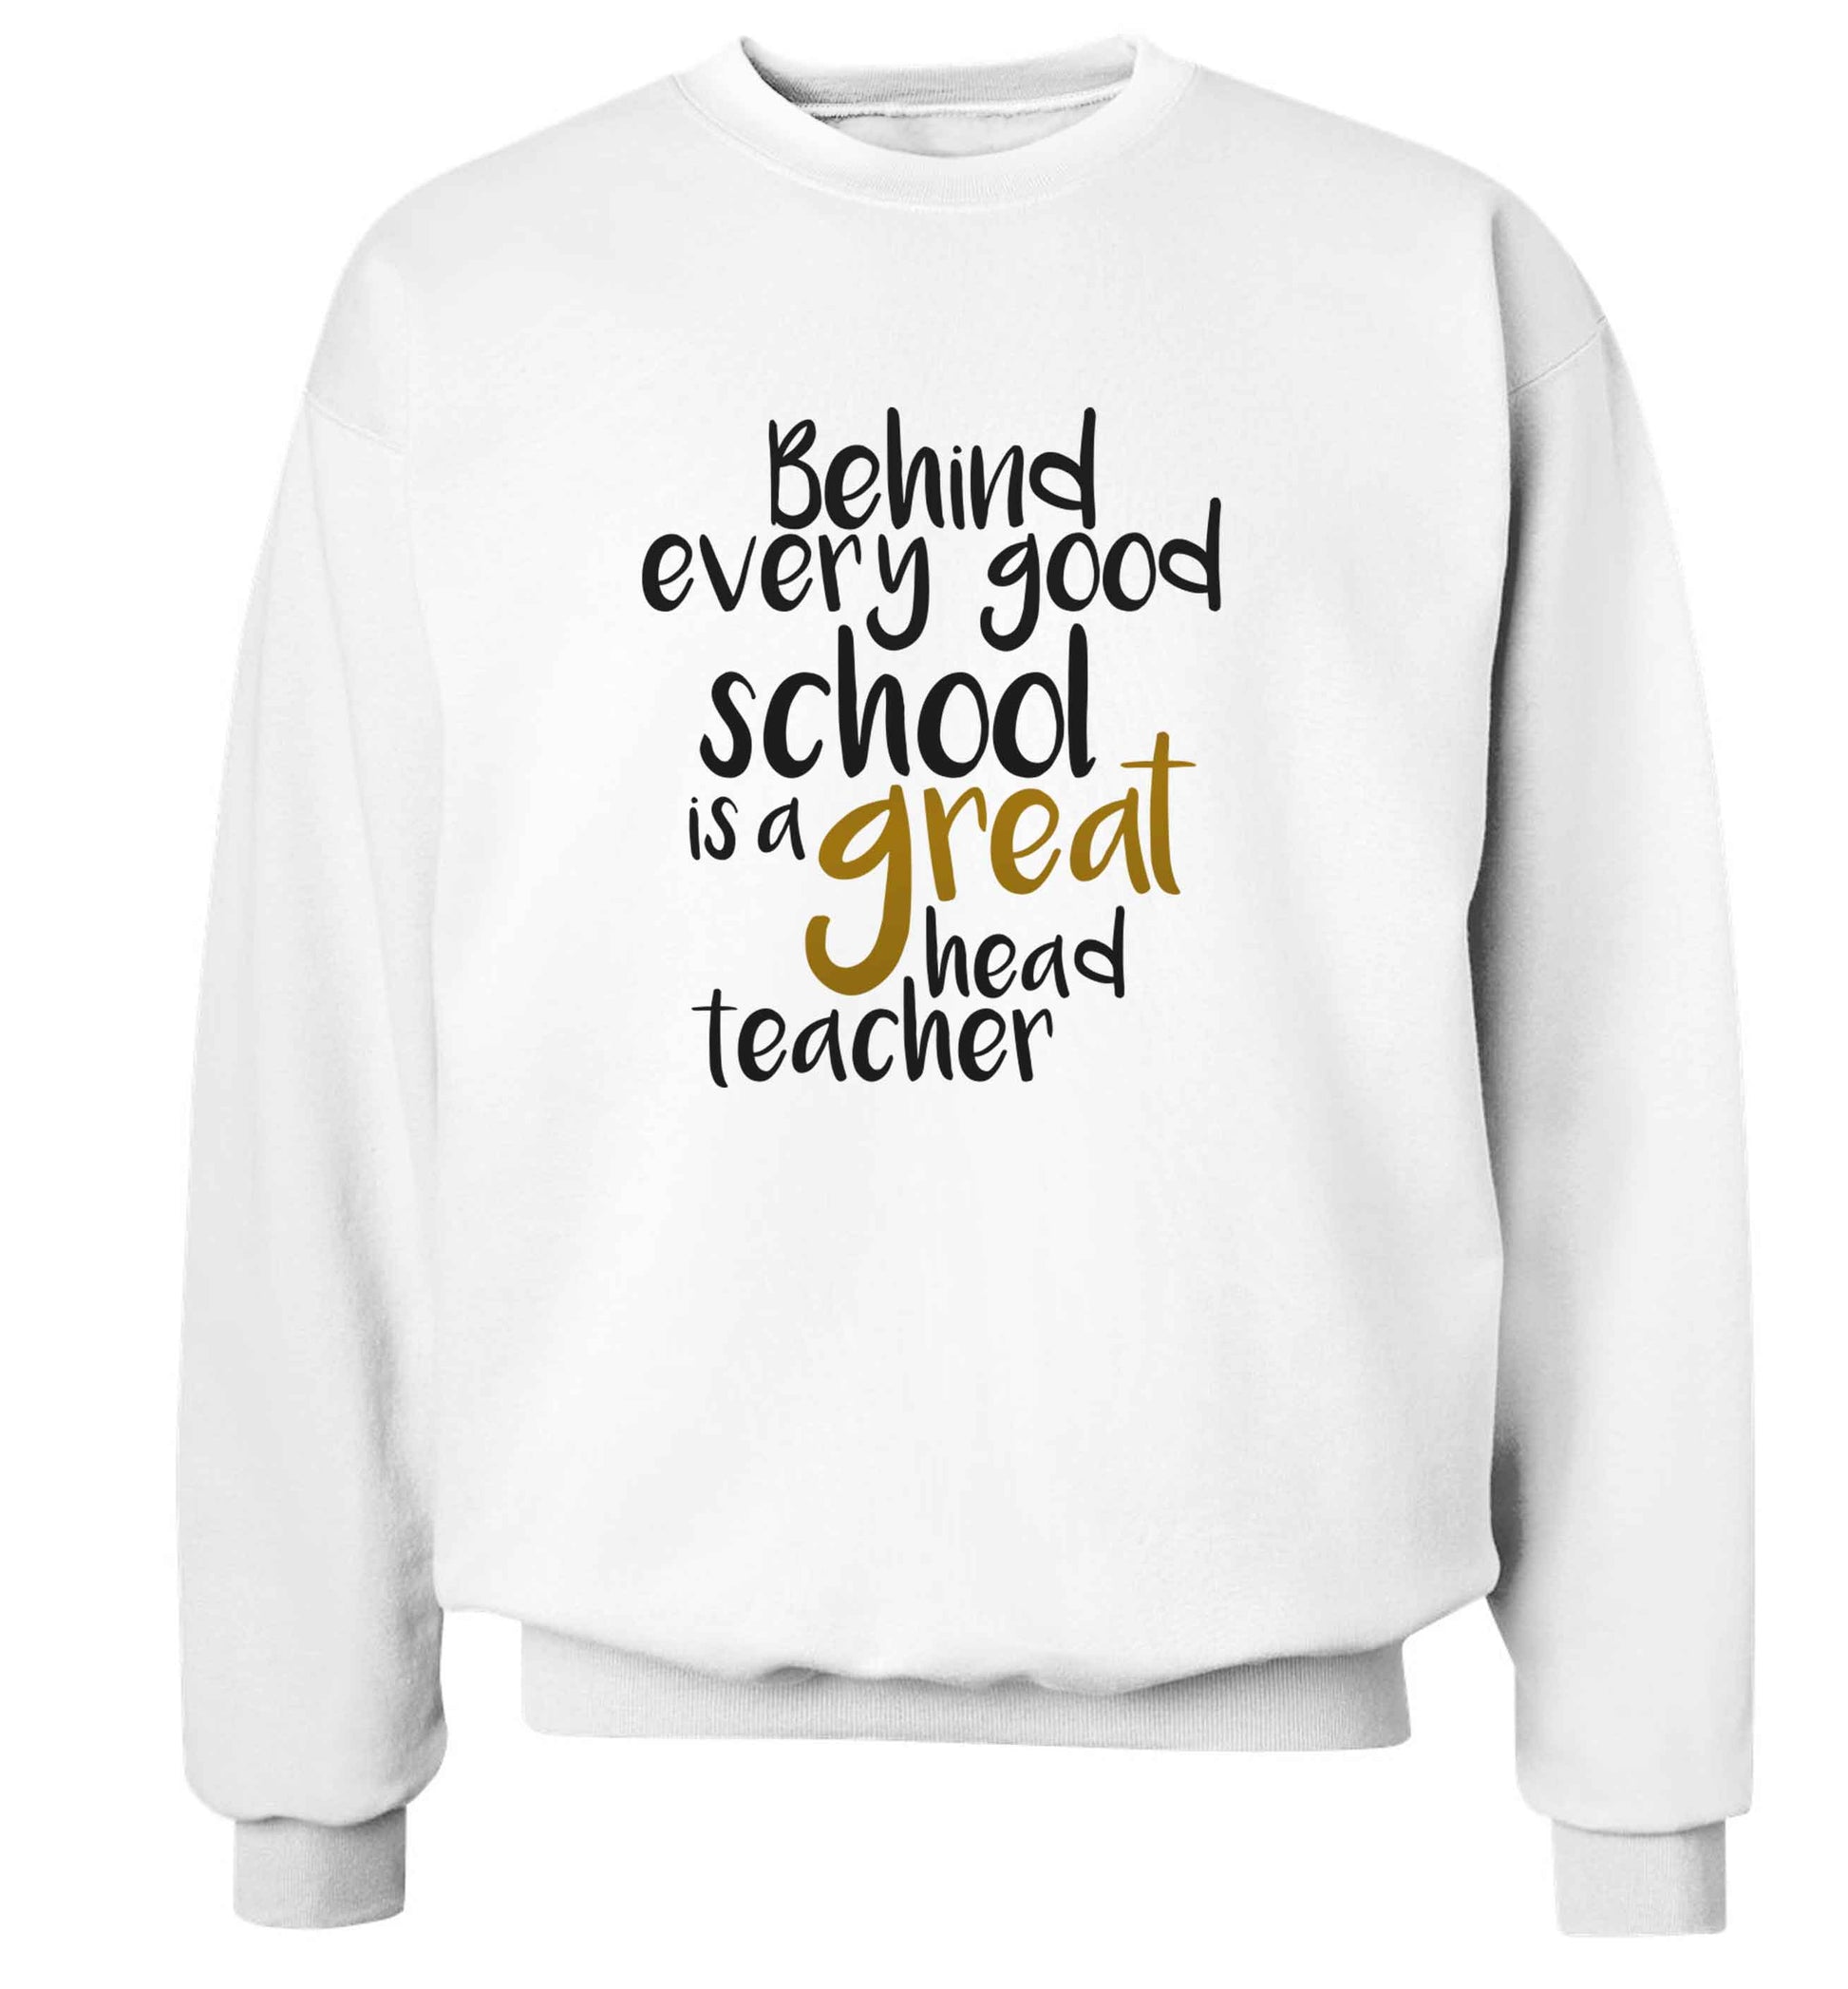 Behind every good school is a great head teacher adult's unisex white sweater 2XL